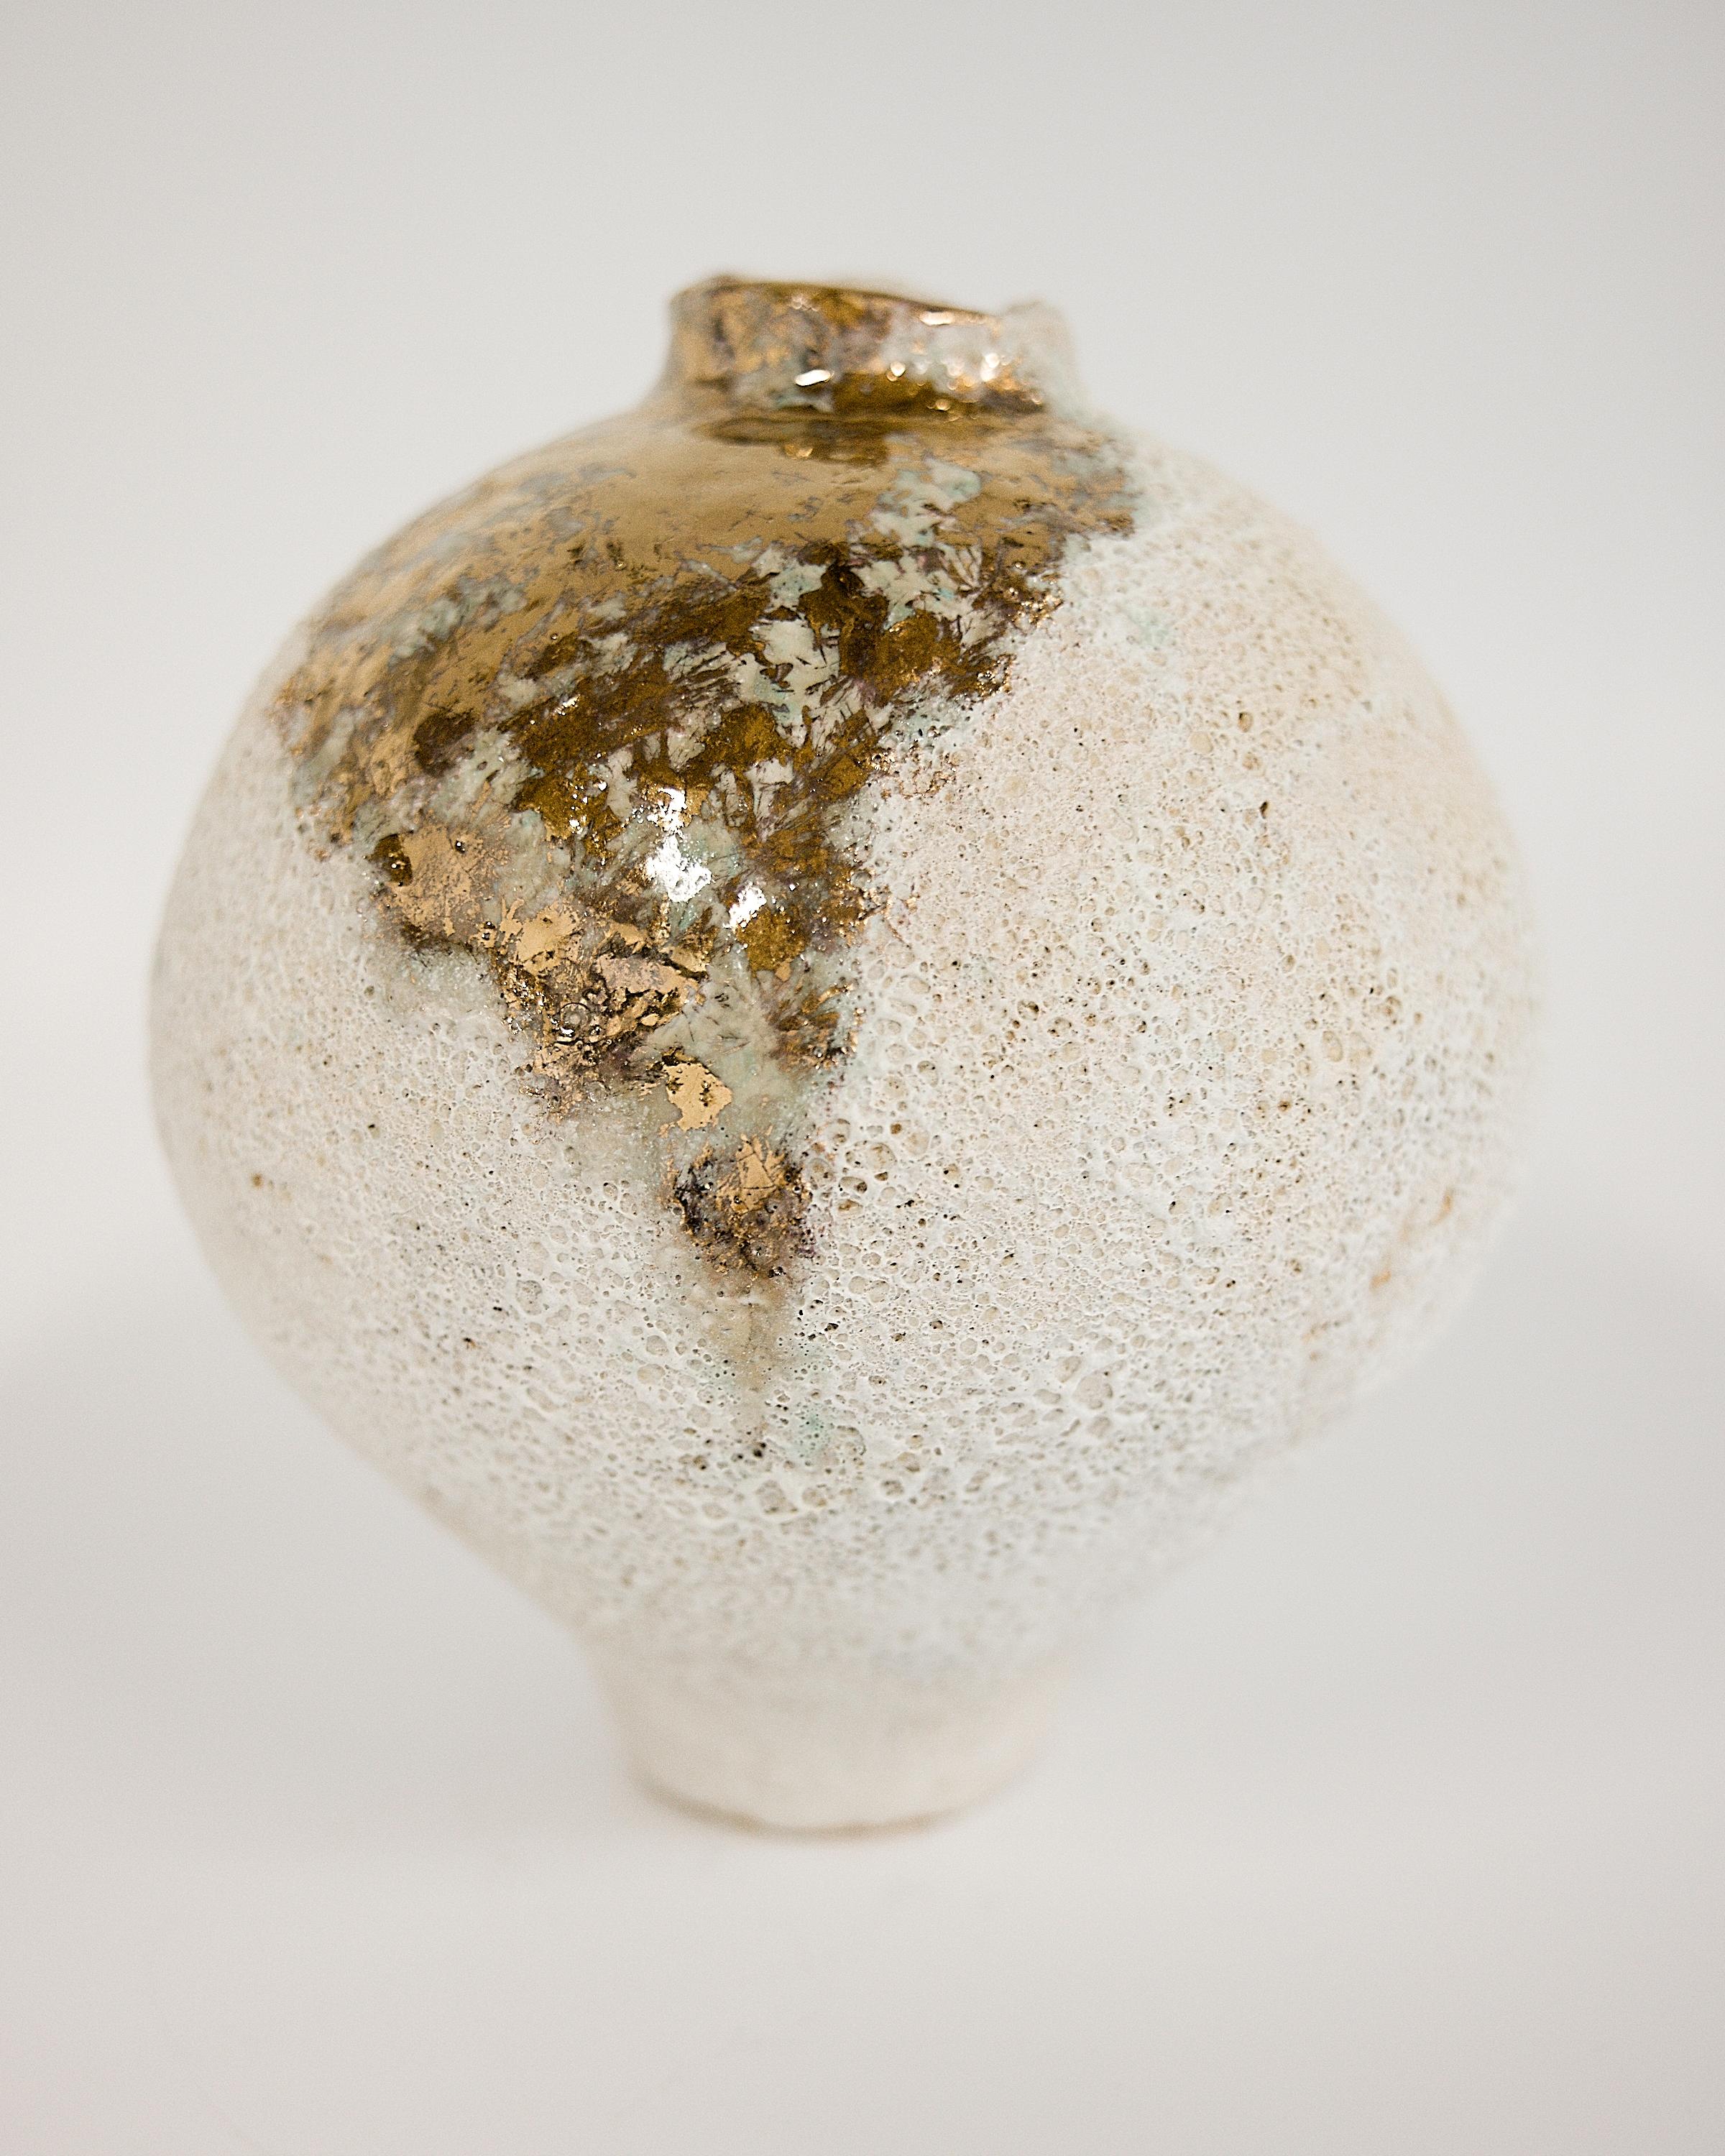 very special Vase

covered in cream Lava glaze and A lot of Gold Lustre 

Balloon shape delicate vase .

One of a kind 

10